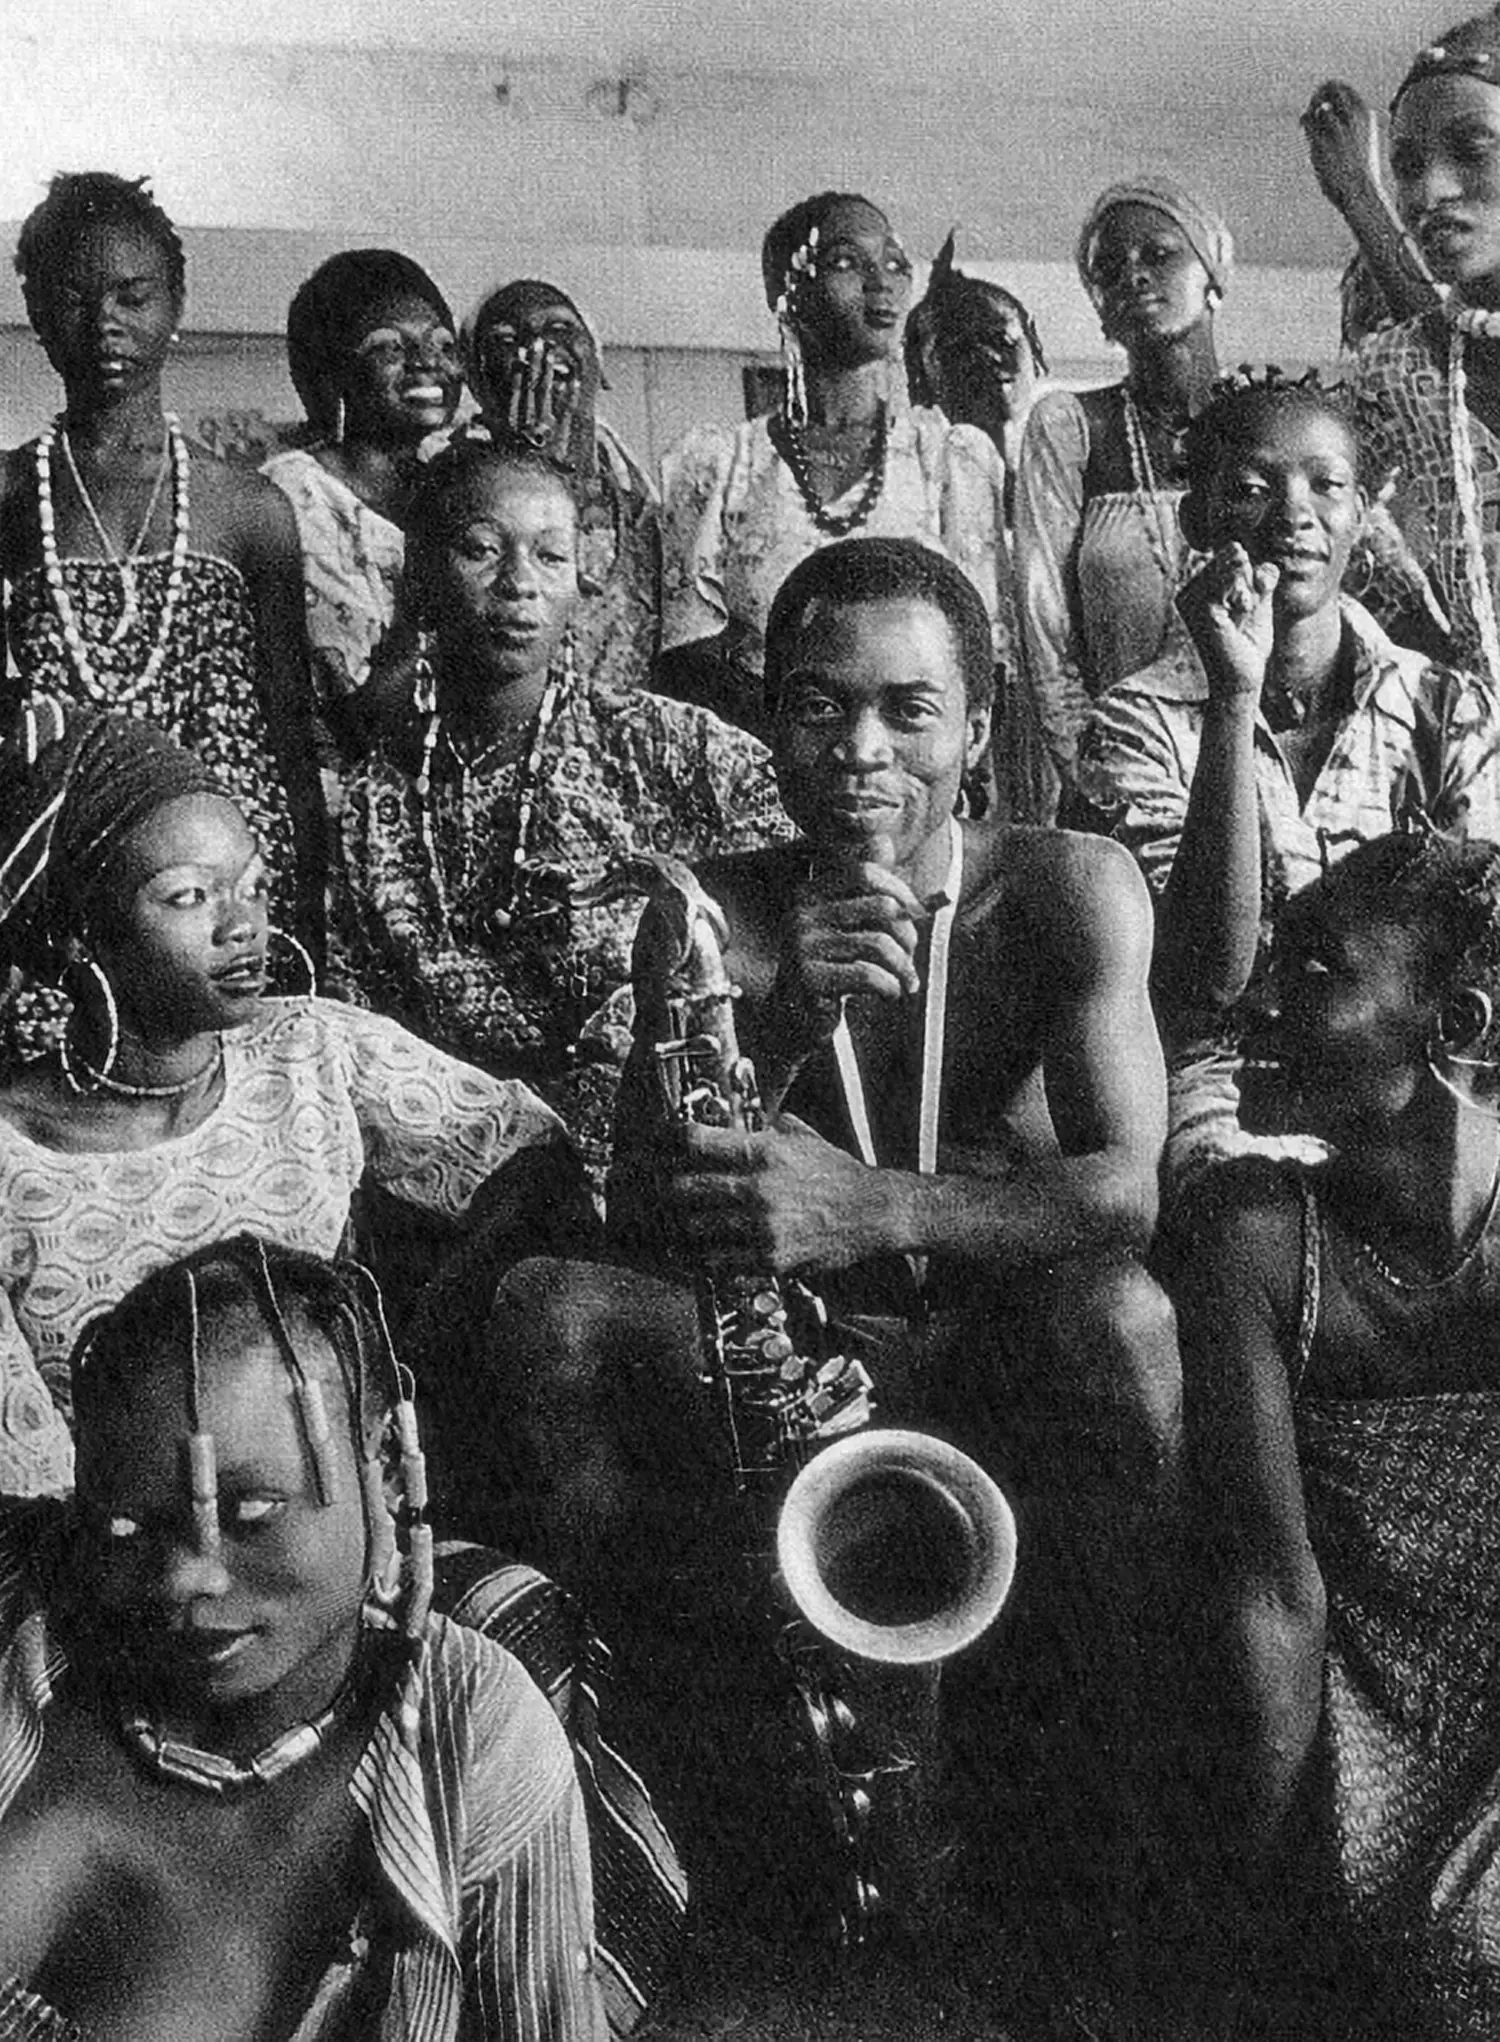 Fela Kuti sits smiling with his saxophone, surrounded on all sides by 17 of his wives.